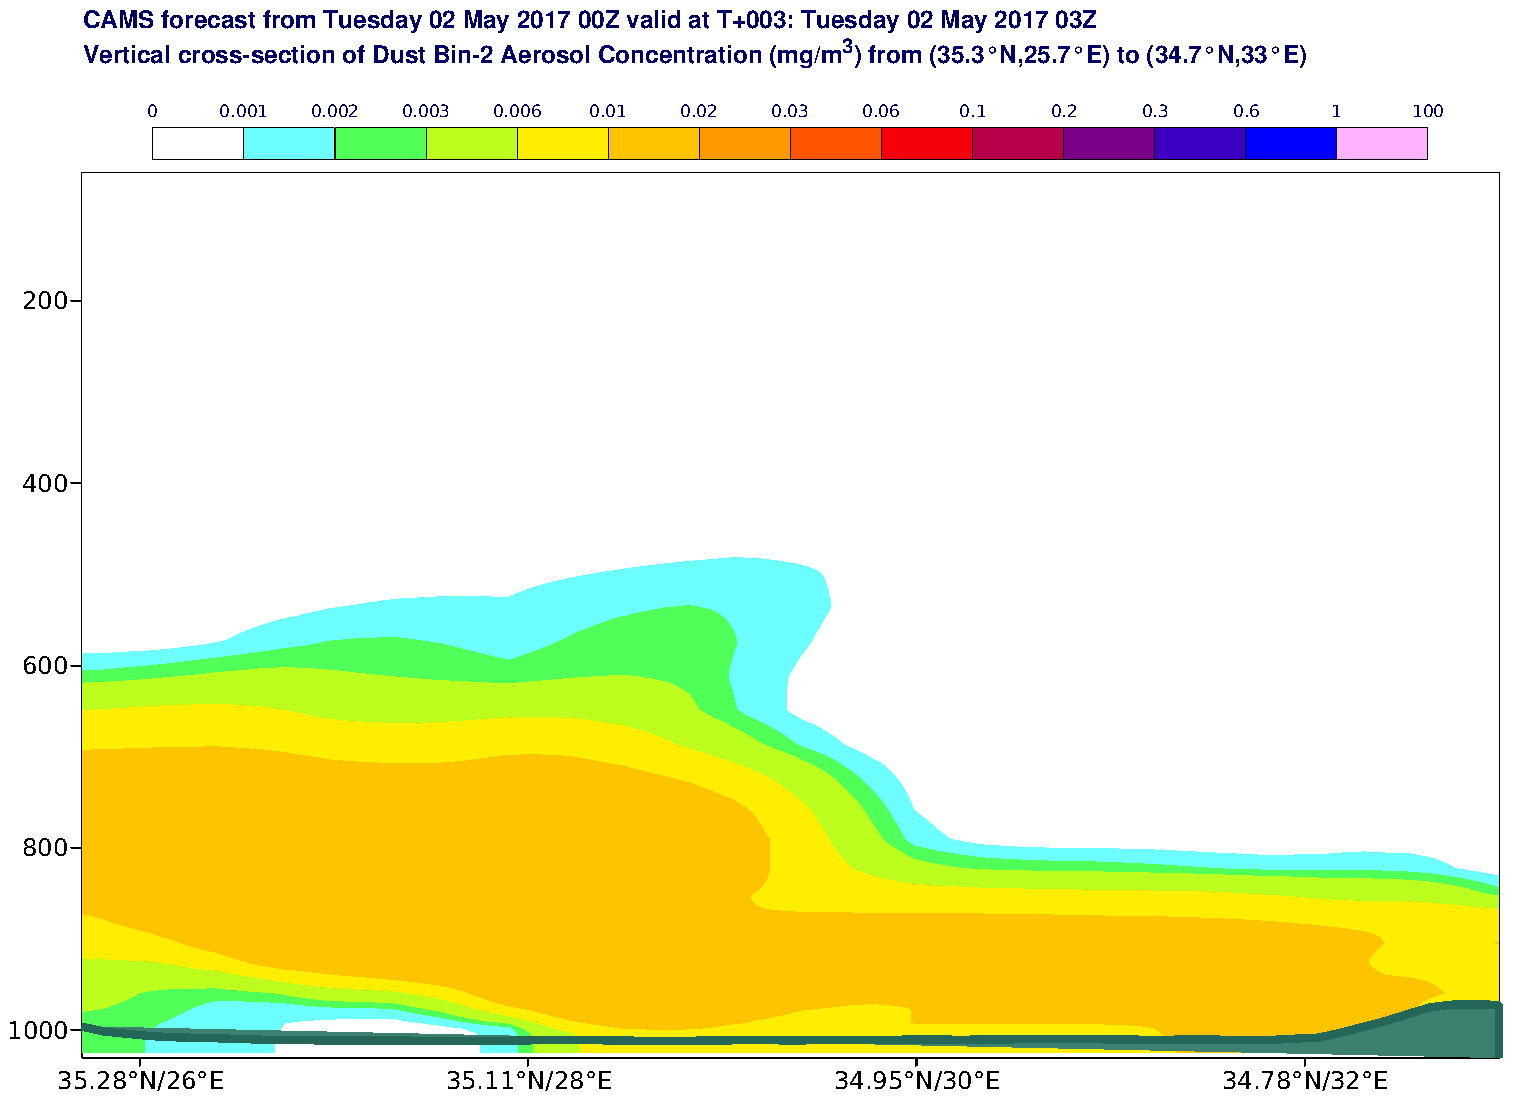 Vertical cross-section of Dust Bin-2 Aerosol Concentration (mg/m3) valid at T3 - 2017-05-02 03:00